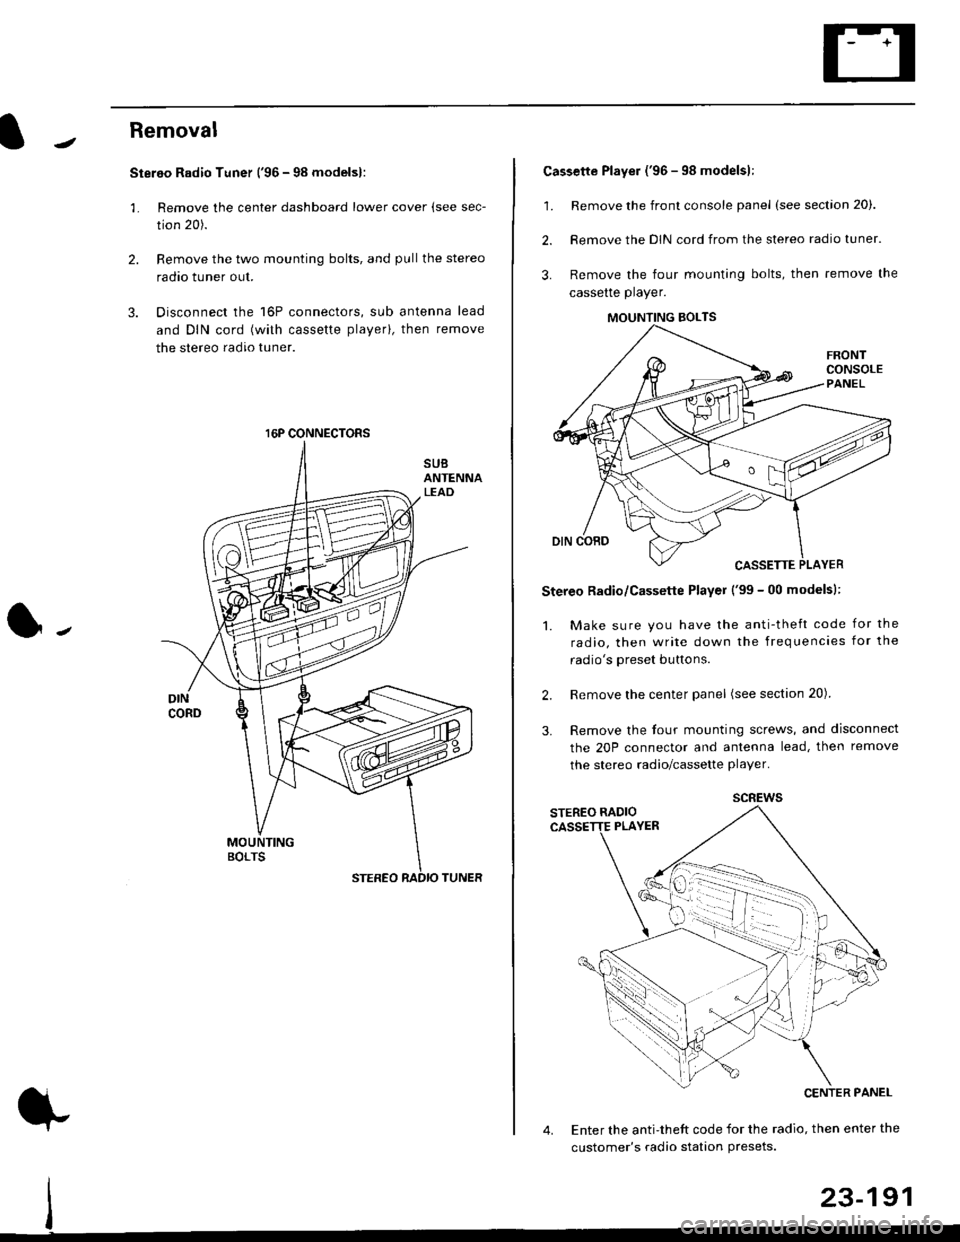 HONDA CIVIC 1996 6.G Workshop Manual Removal
Stereo Radio Tuner (96 - 98 modelsl:
3.
1.
2.
Remove the center dashboard lower cover (see sec-
tion 20).
Remove the two mounting bolts, and pullthe stereo
radao tuner out.
Disconnect the 16P